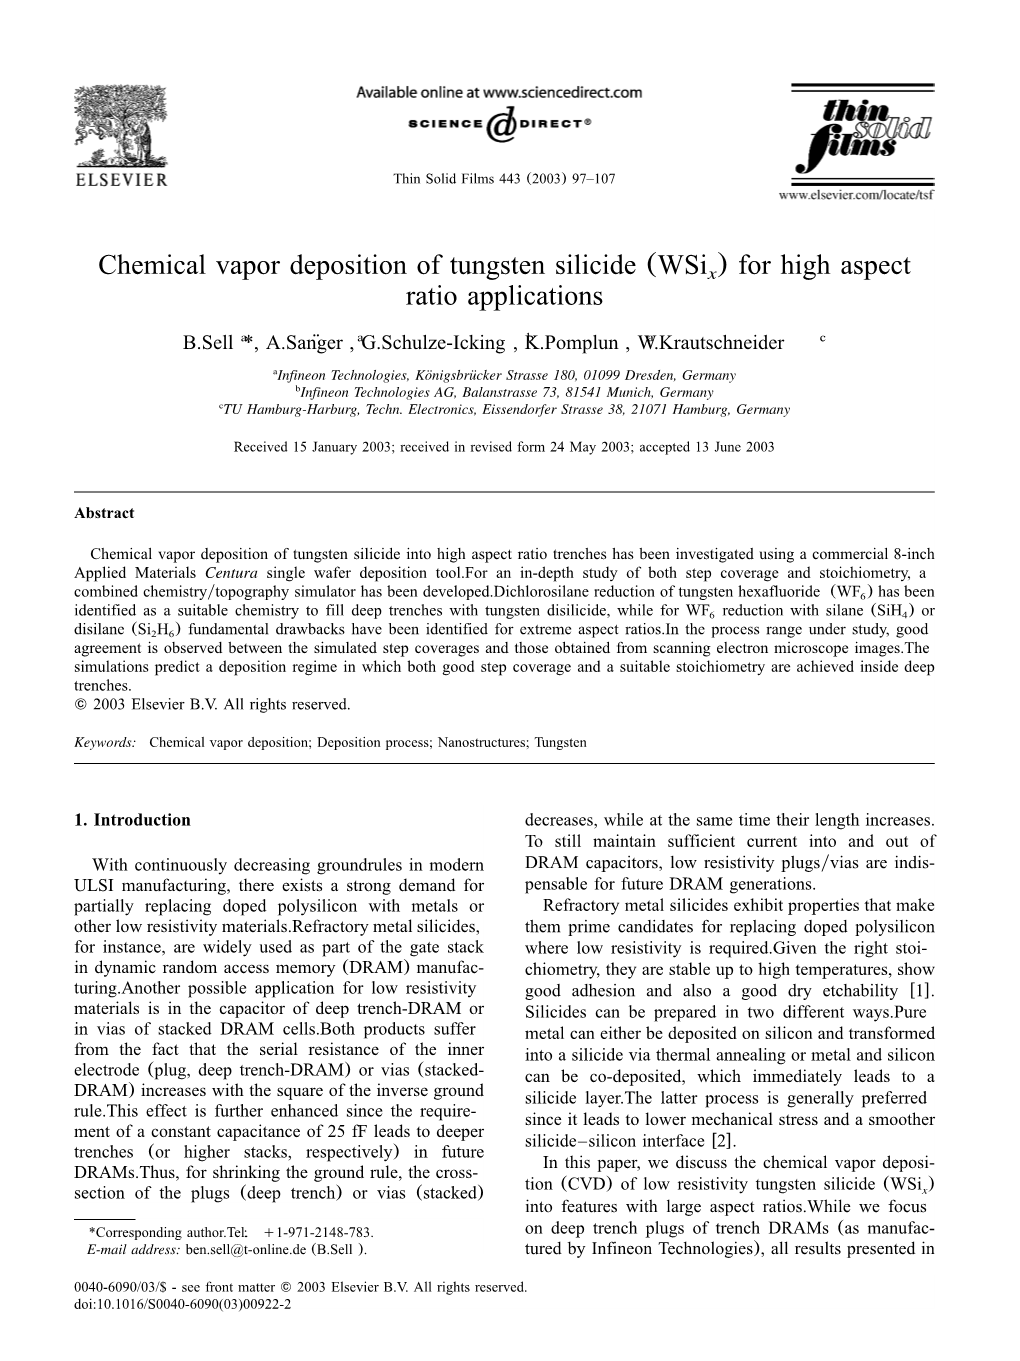 Chemical Vapor Deposition of Tungsten Silicide (Wsi ) for High Aspect Ratio Applications